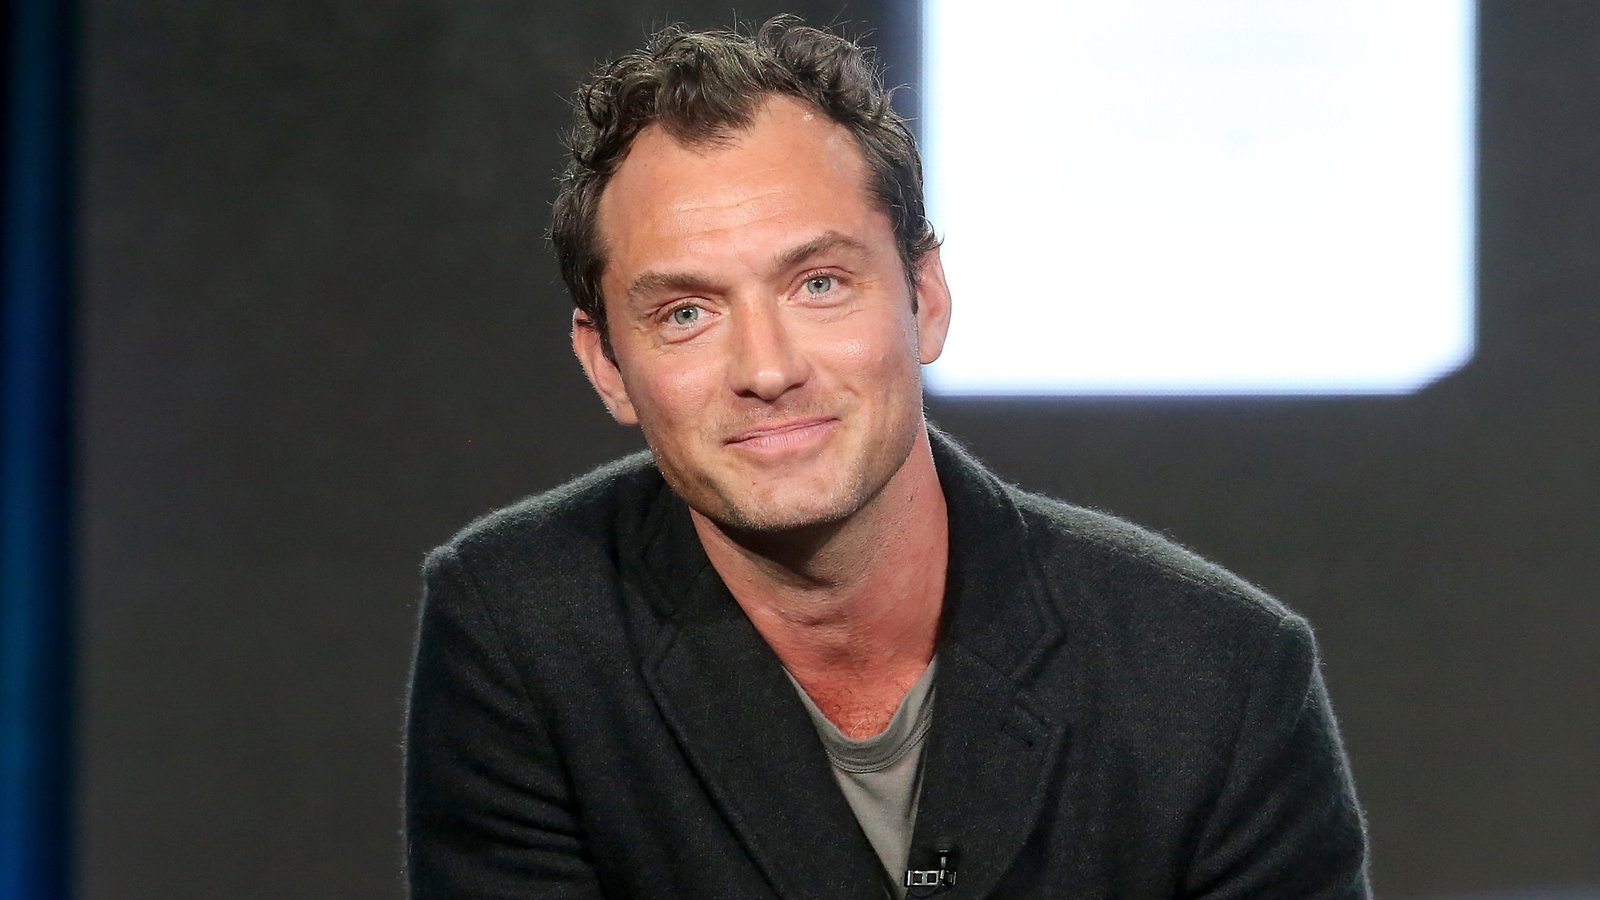 Beasts that! Jude Law to play young Dumbledore - RTE.ie